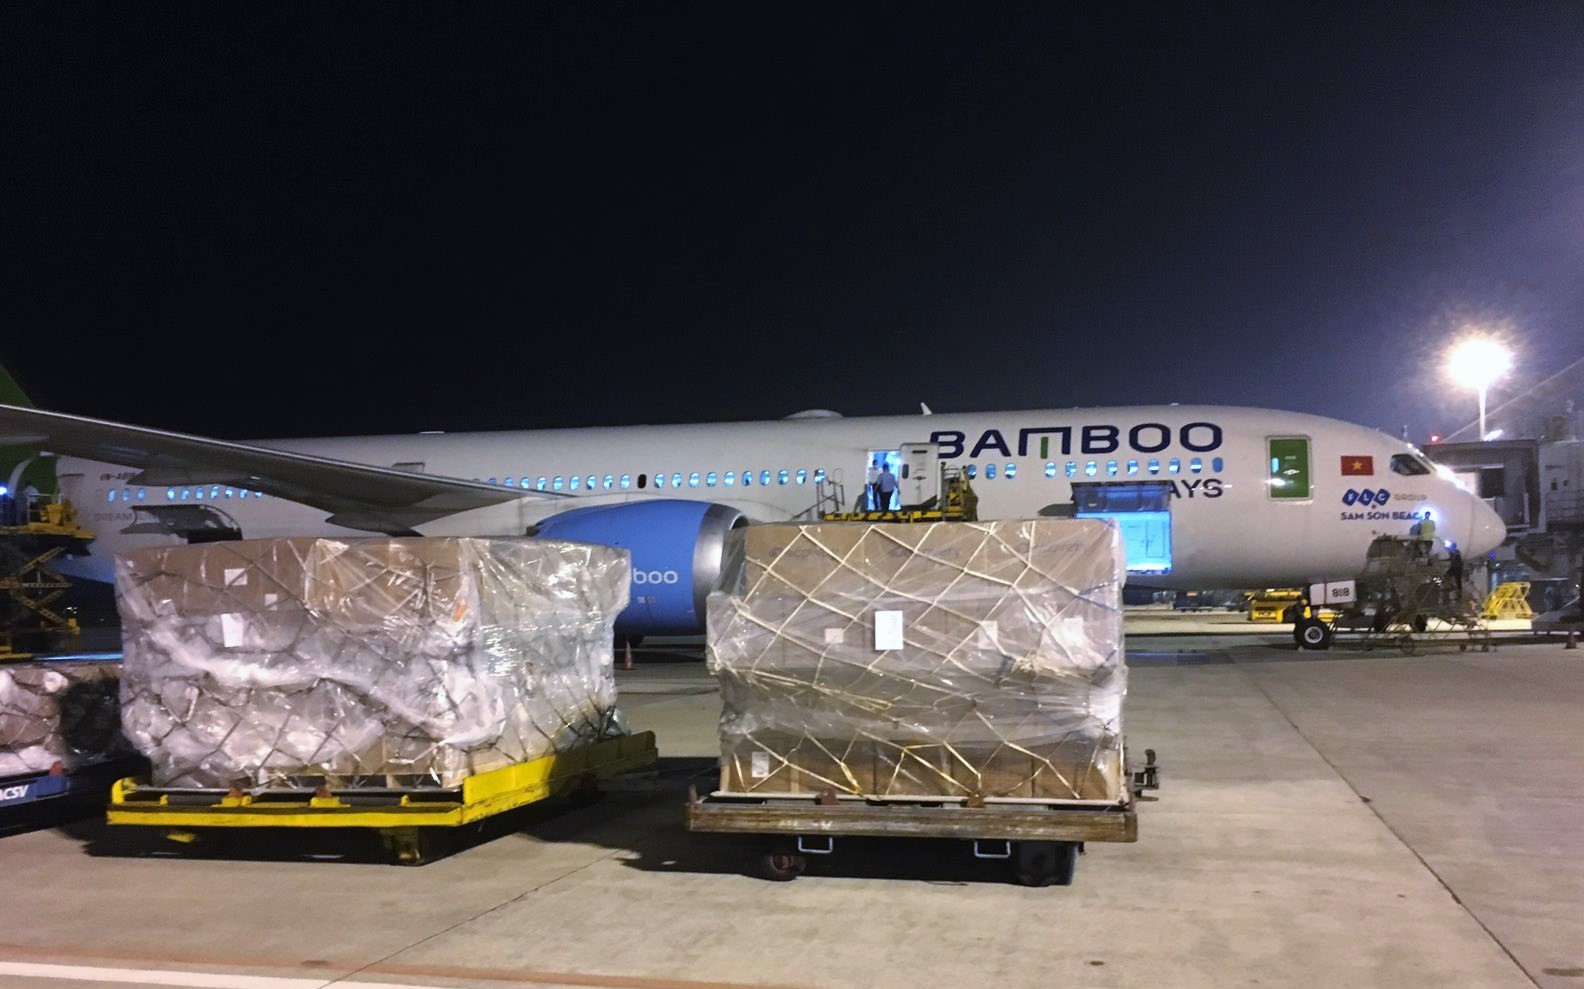 Bamboo Airways' cargo flight QH468 departing from Hanoi landed at Incheon International Airport.